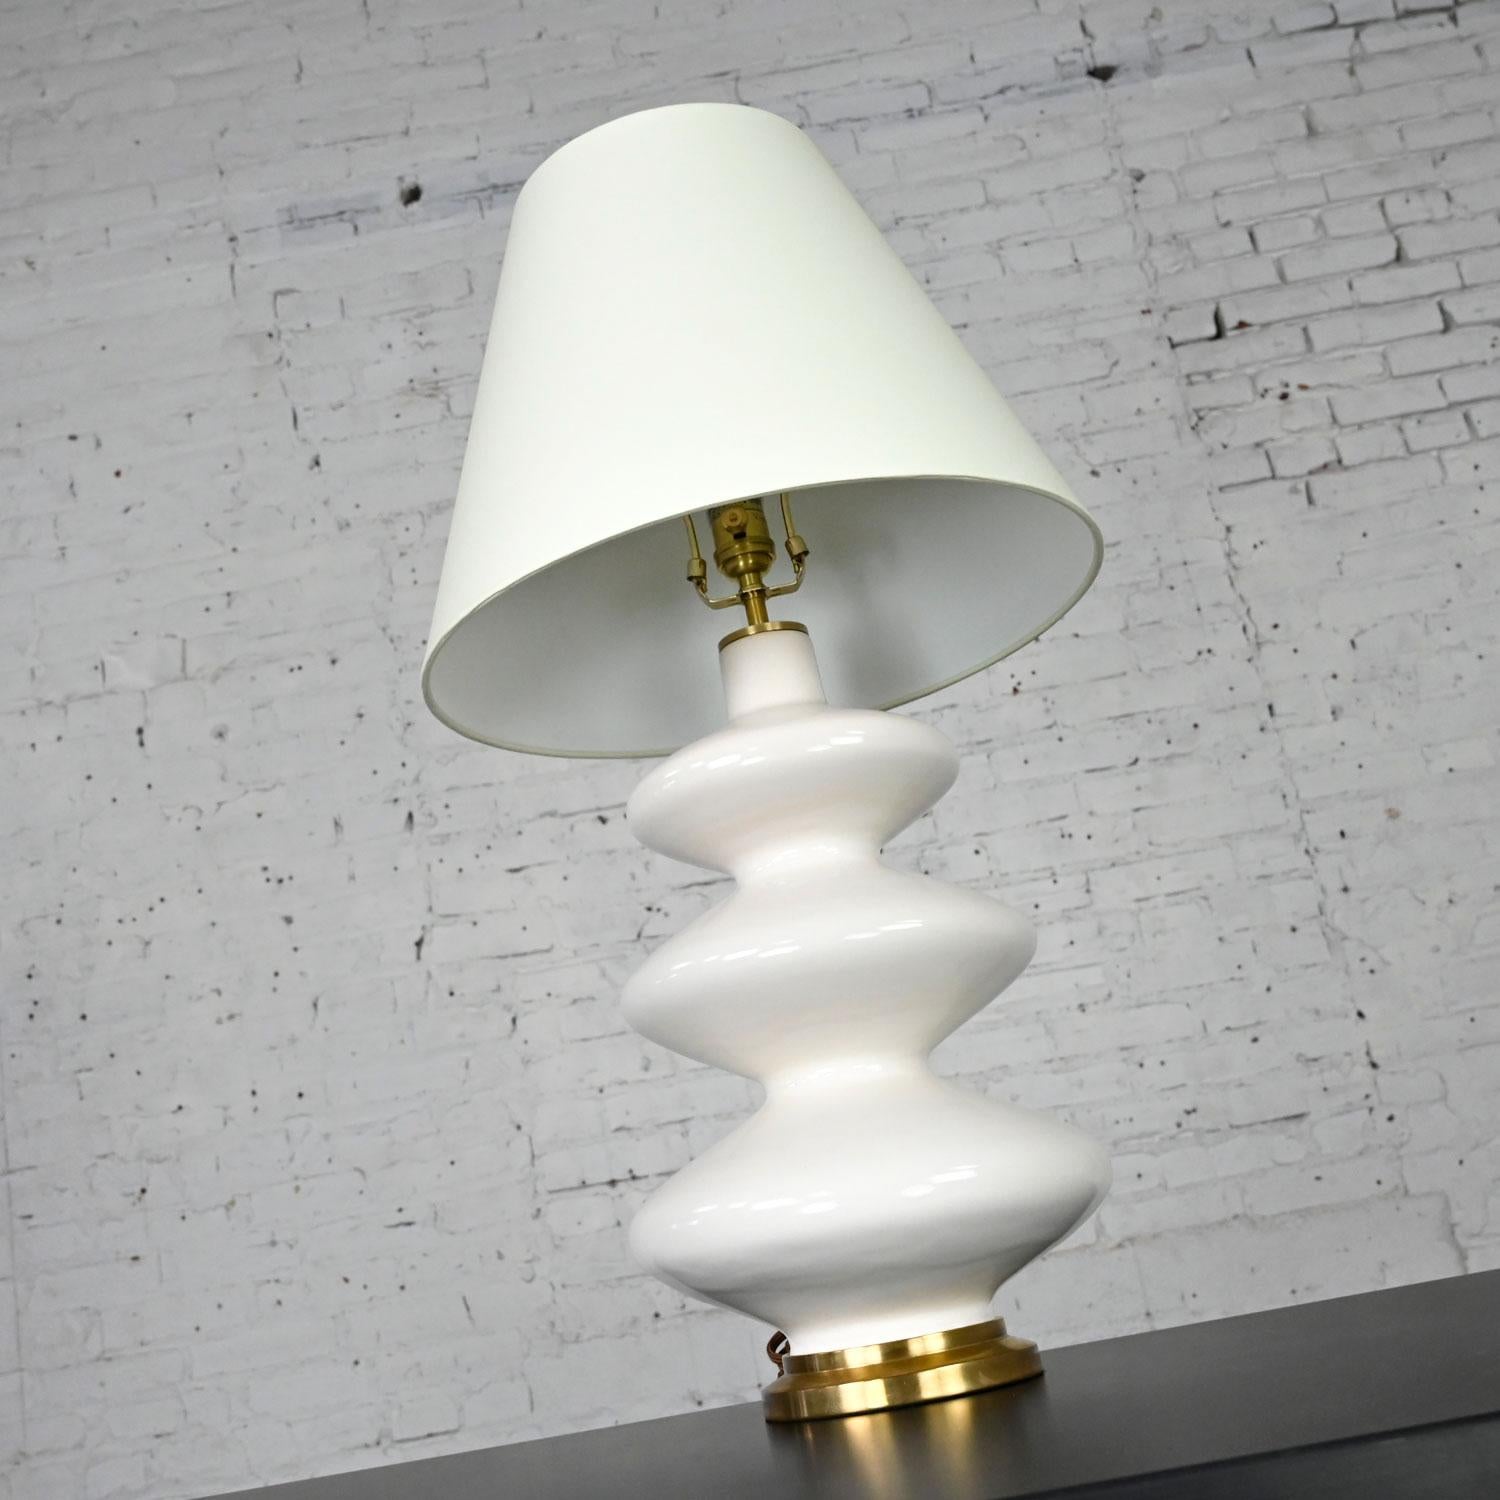 Gorgeous Smith ivory table lamp by Christopher Spitzmiller for Visual Comfort. Comprised of an ivory ceramic lamp body with living finish and featuring a brass check ring, brass socket, brass ball finial, and brass base with its original natural